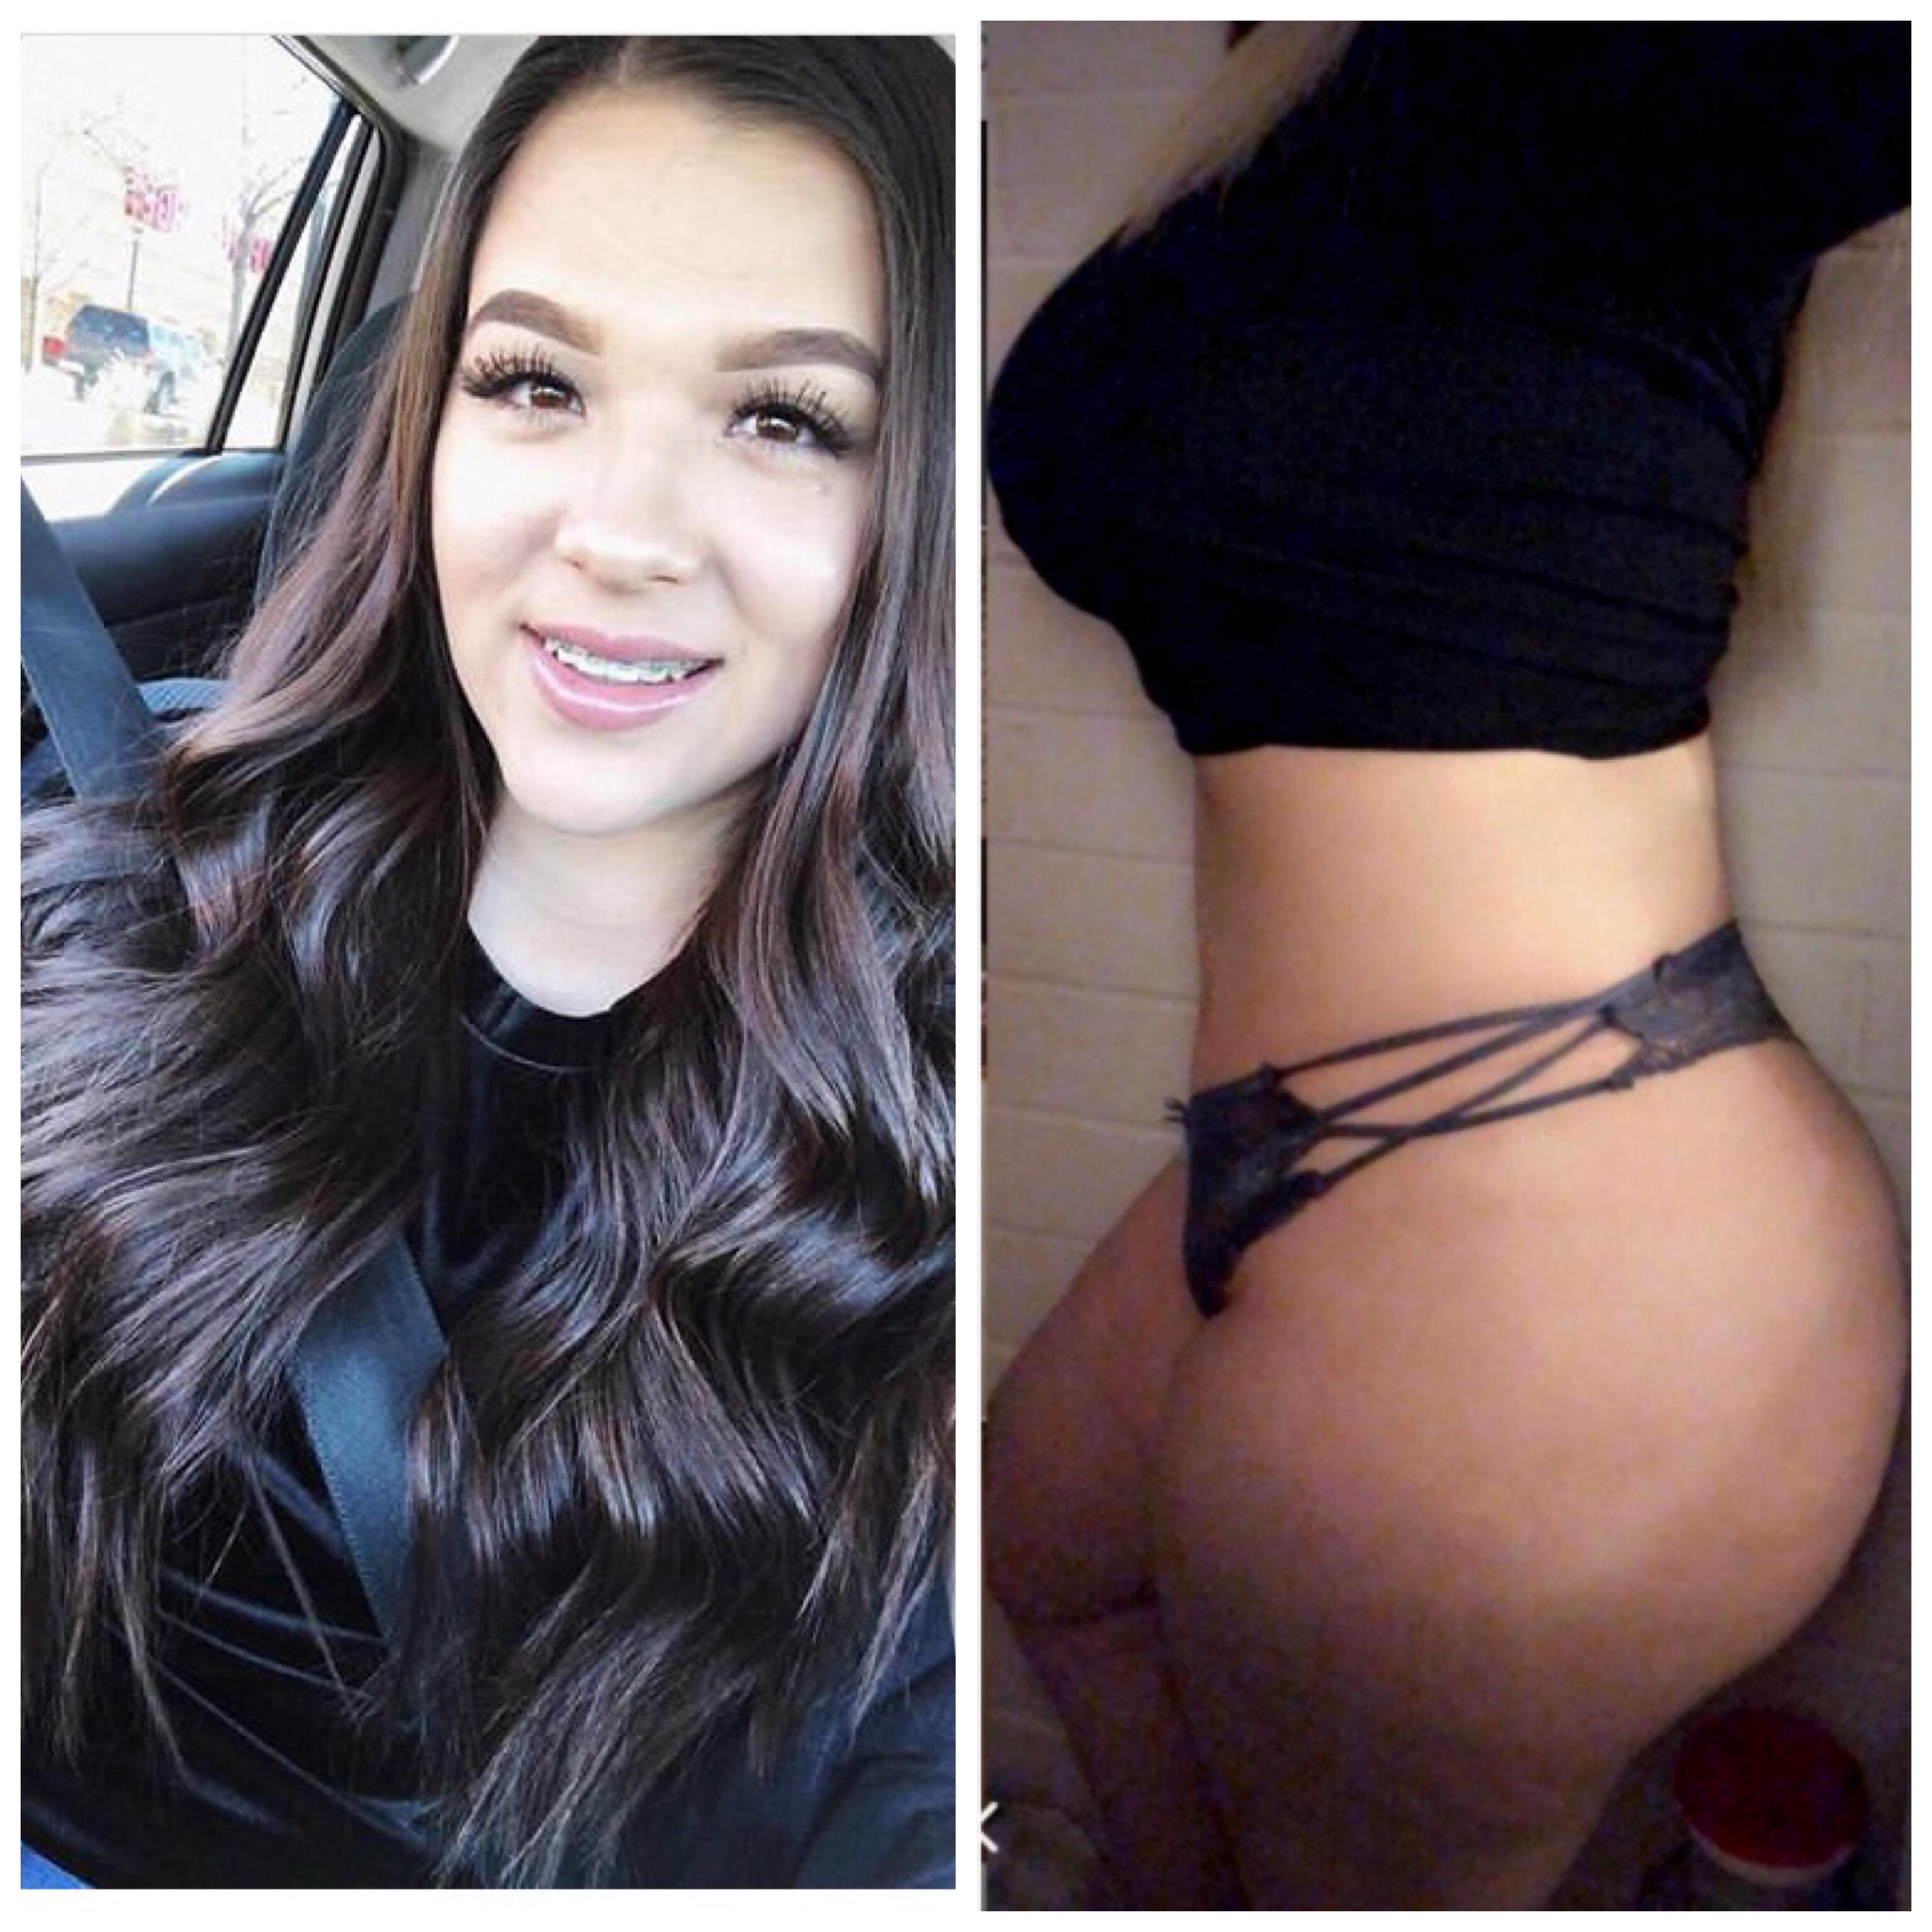 I’m a cute 19 year old thick girl with a big booty ? would you pullout or creampie me? ???